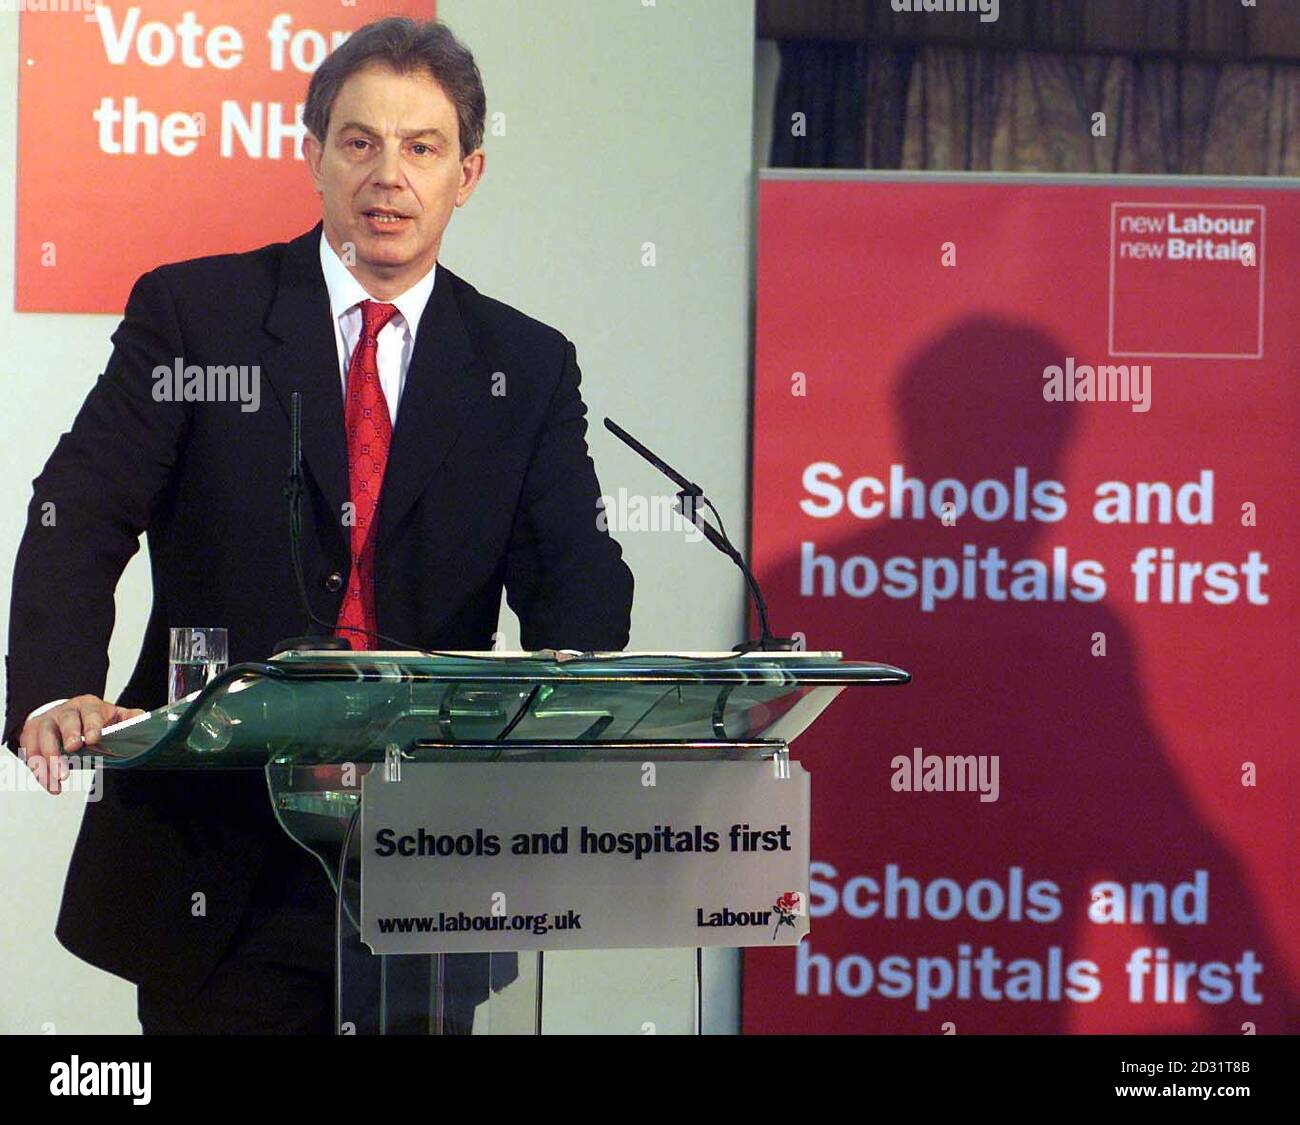 Prime Minister Tony Blair at his party's election news conference in the St Georges Community Centre in Salford, Manchester. *...Mr Blair promised to 'stand and fight' for the hard-working families of Britain, and said, 'Today is pledge day. A day when every Labour candidate takes our crusade for schools and hospitals to every part of the country.' Stock Photo